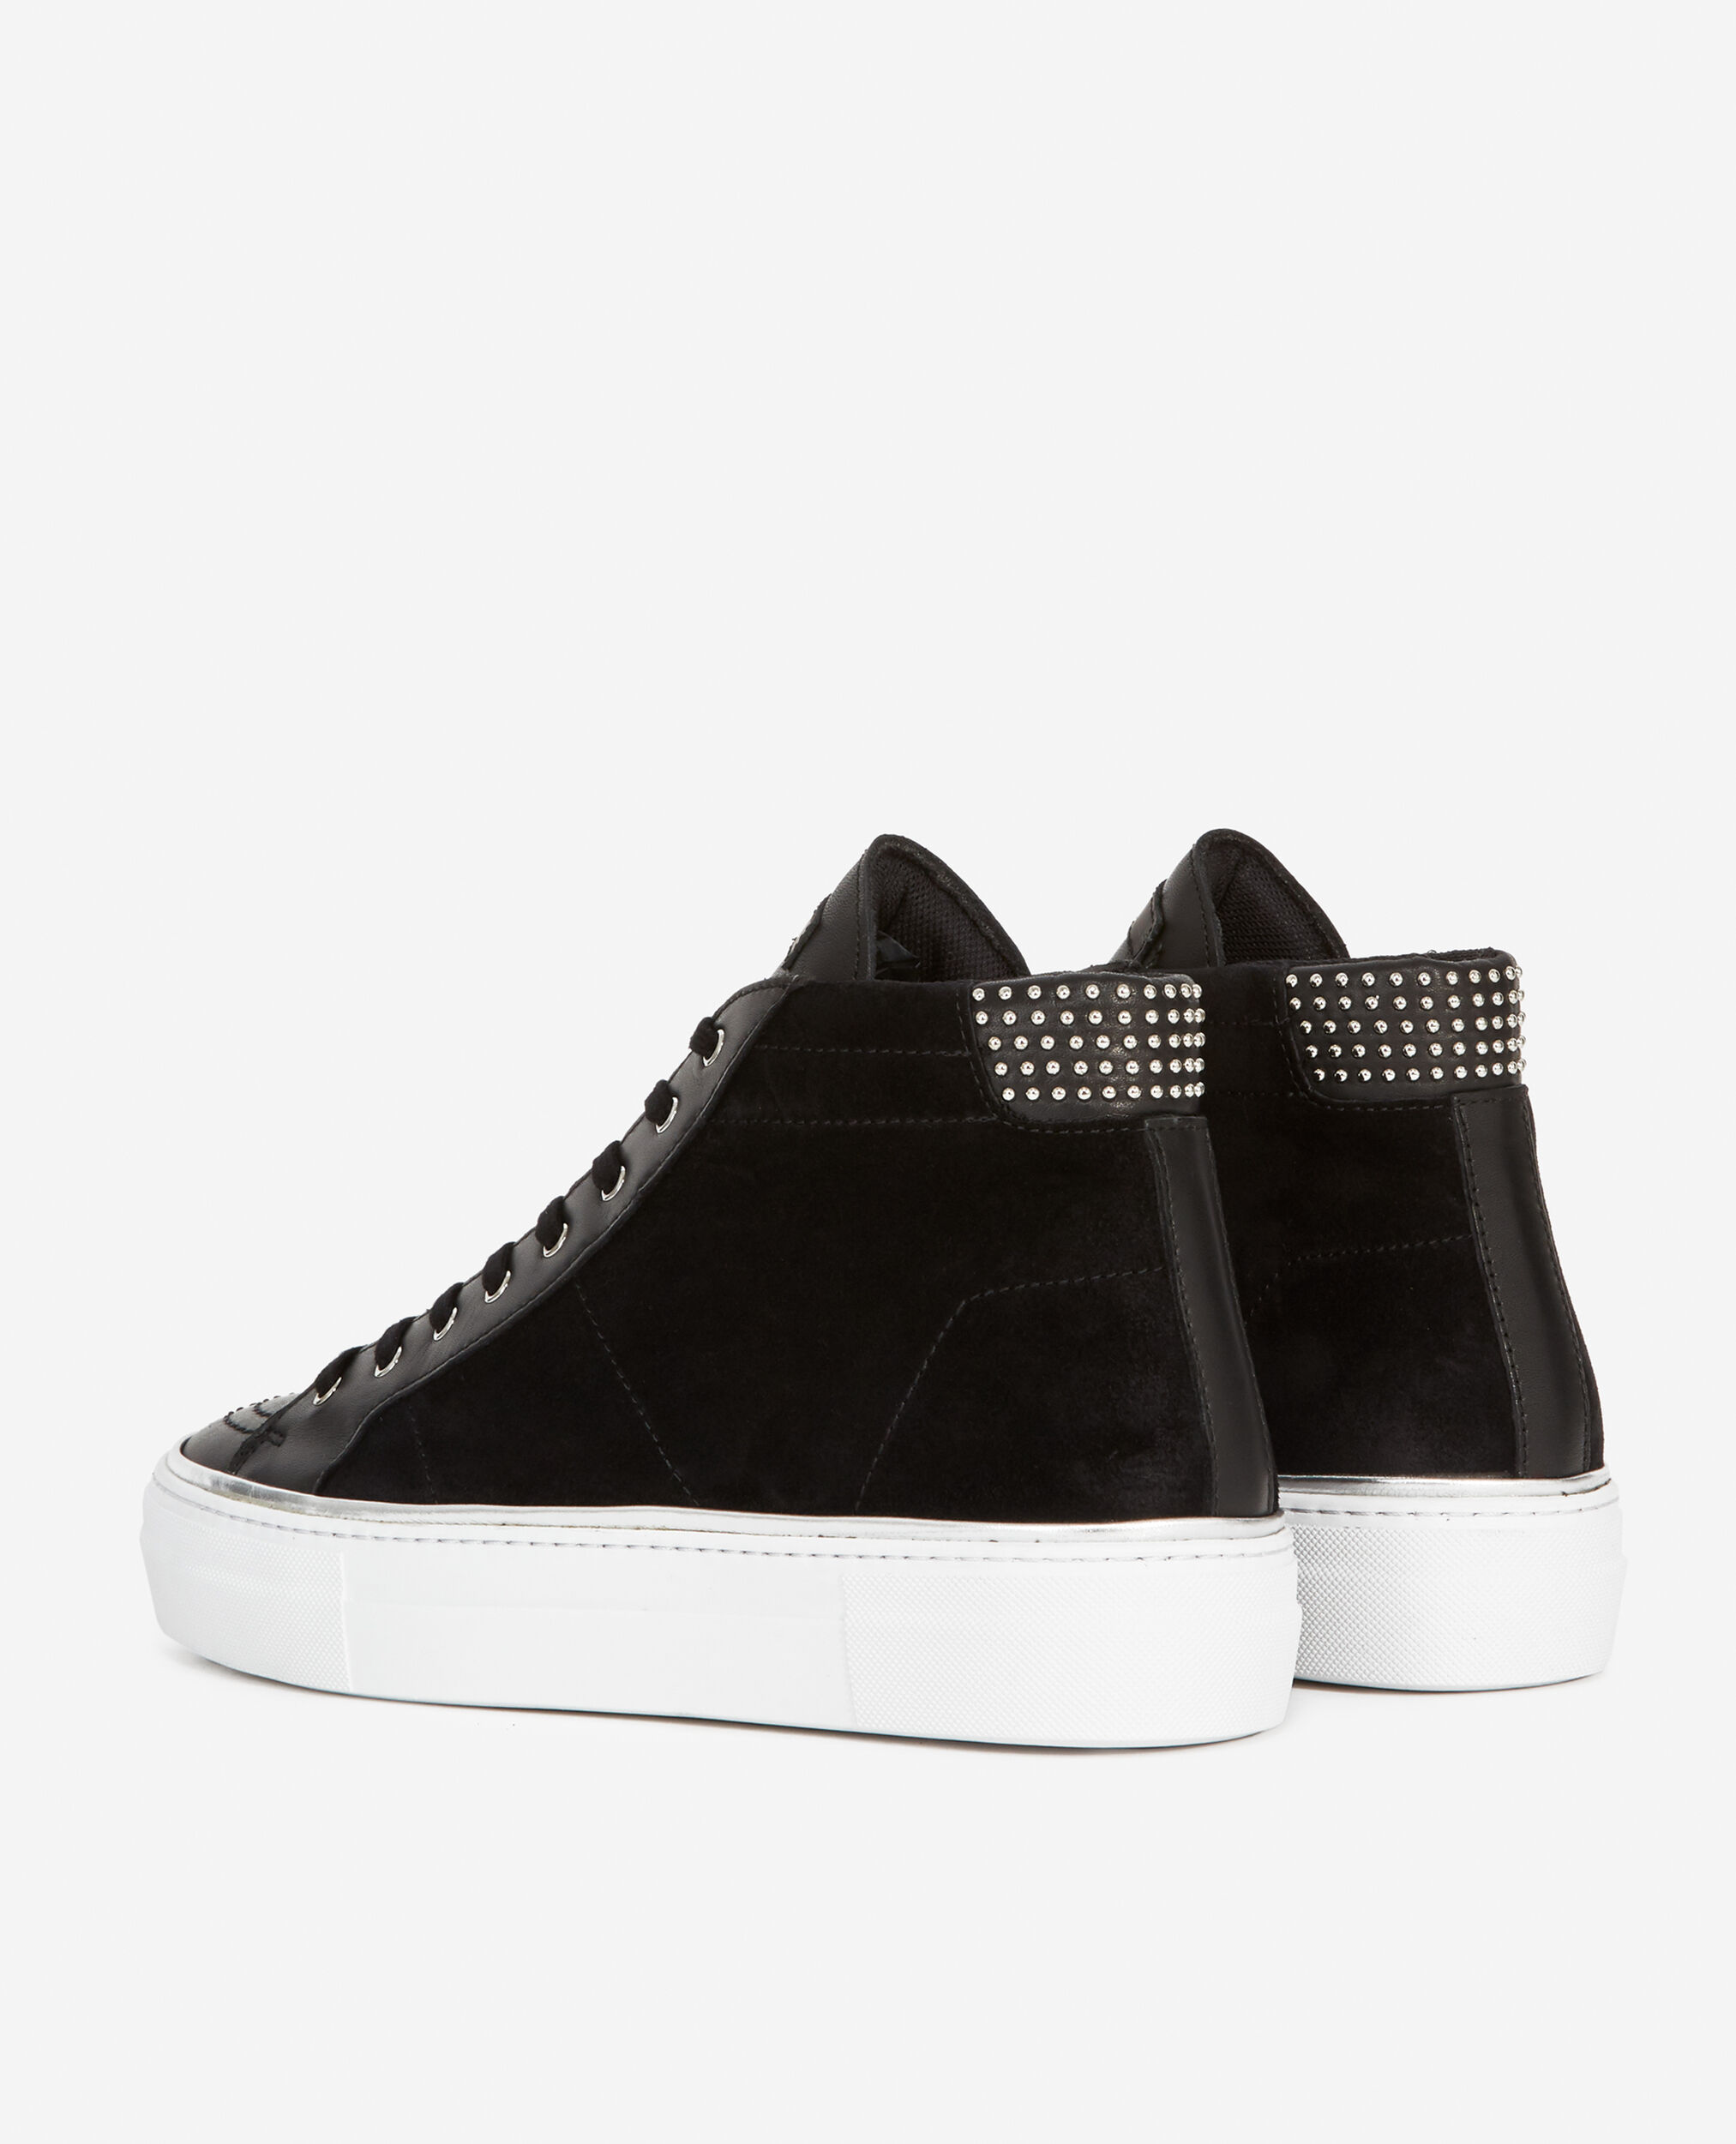 Black high-top sneakers with suede, BLACK, hi-res image number null